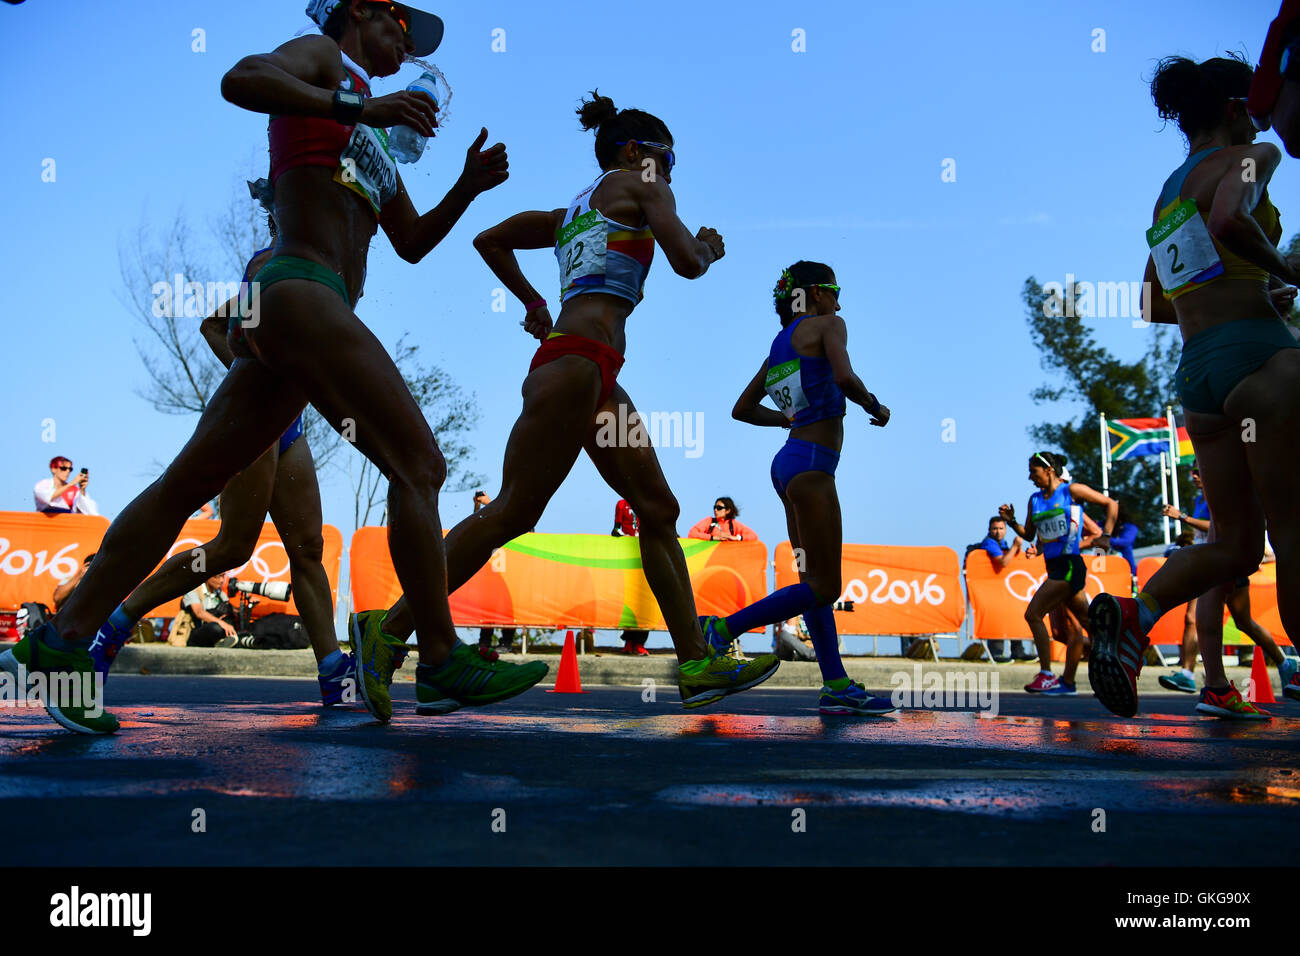 Rio de Janeiro, Brazil. 19th August, 2016. athletes on the route during the womens 20km race walk on Day 14 of the 2016 Rio Olympics at Pontal on August 19, 2016 in Rio de Janeiro, Brazil. (Photo by Roger Sedres/Gallo Images) Credit:  Roger Sedres/Alamy Live News Stock Photo